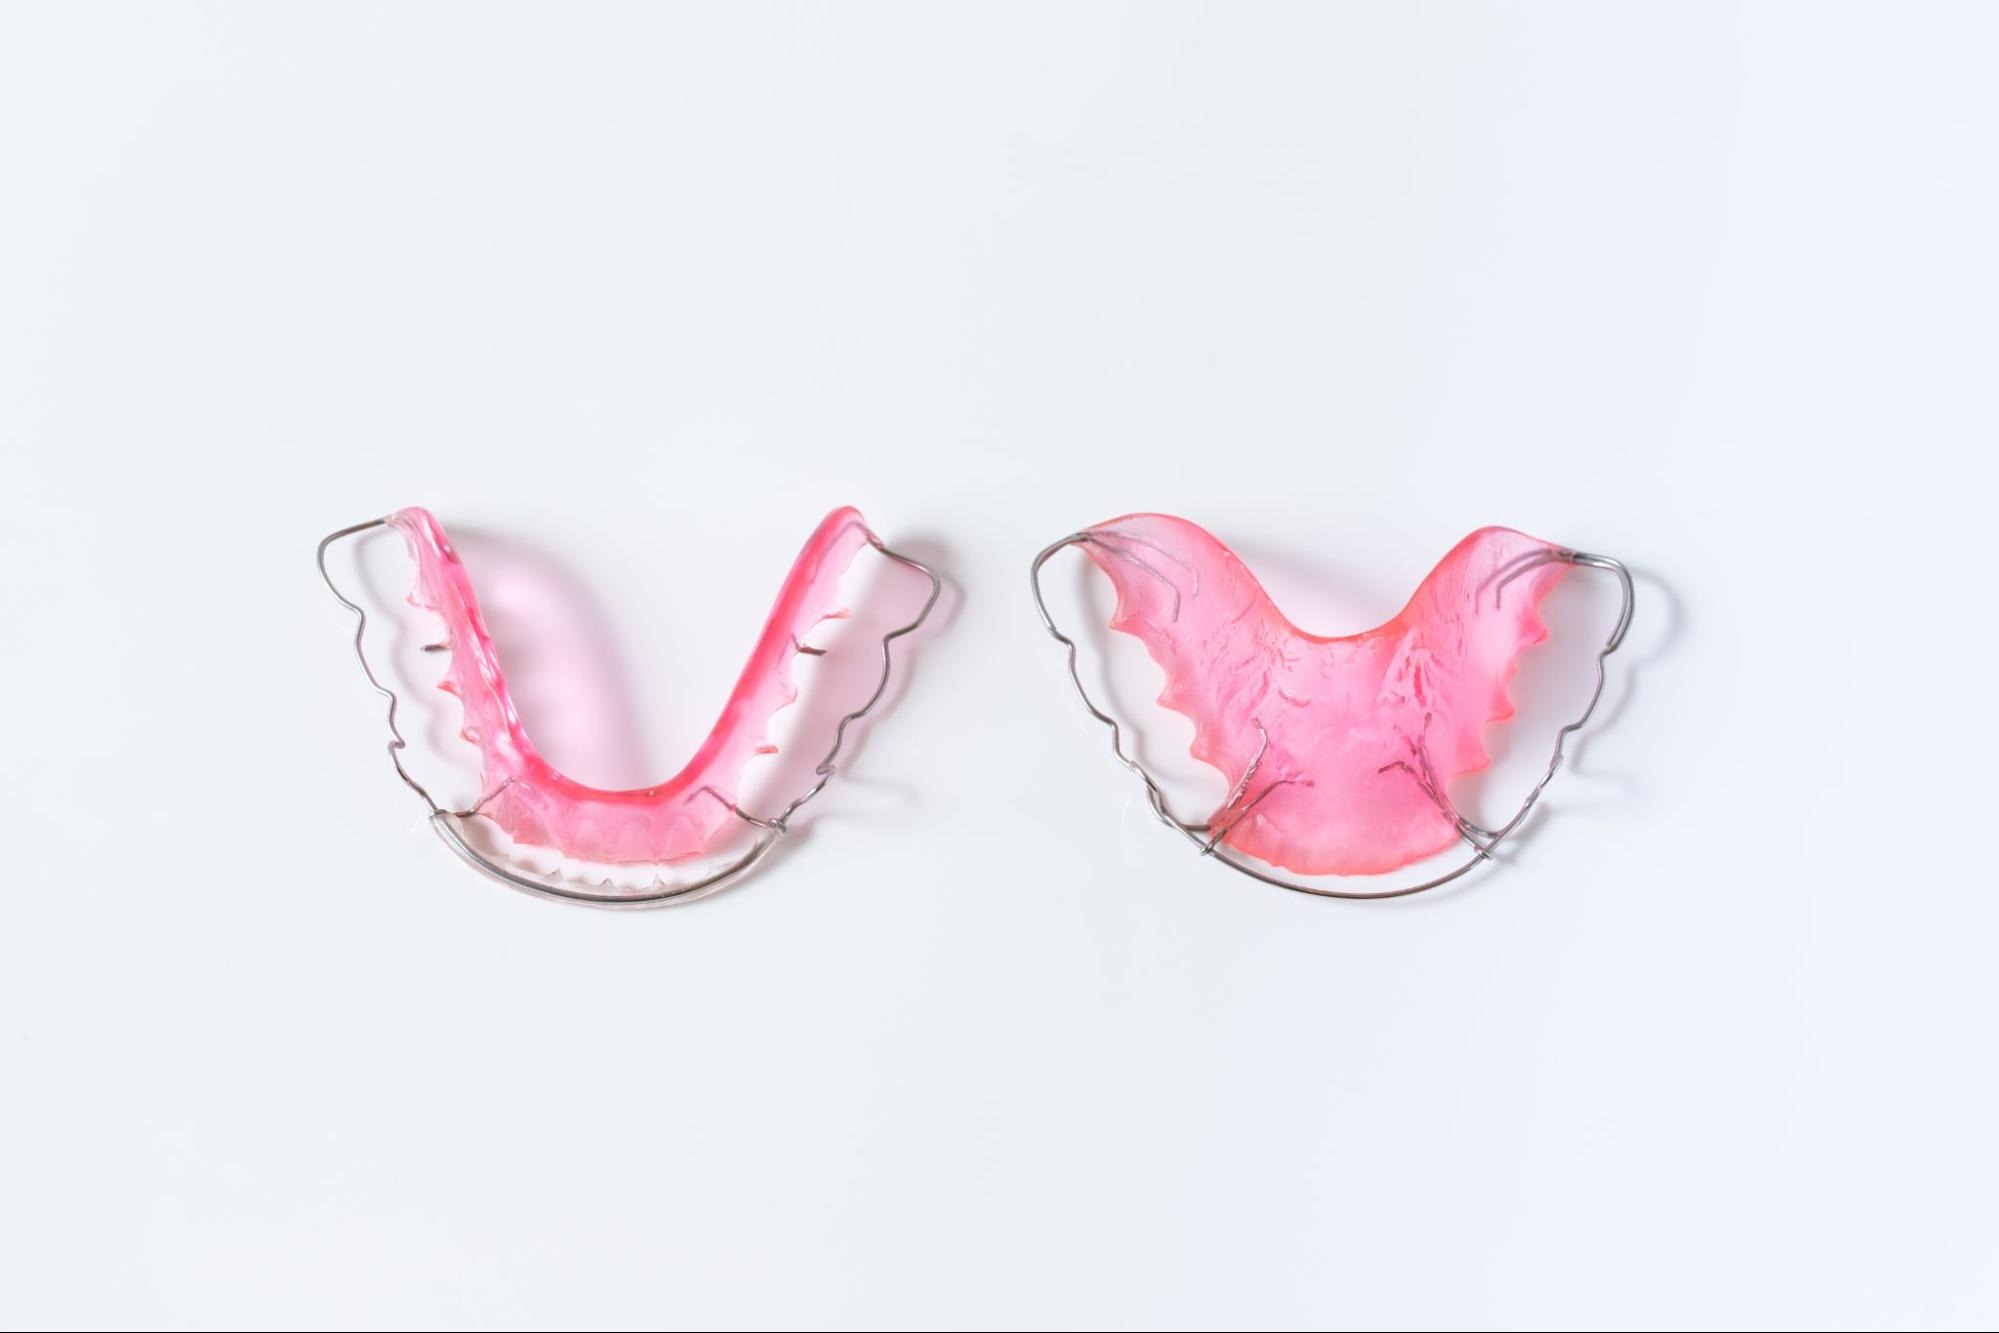 Why Cleaning and Caring For a Retainer is Important